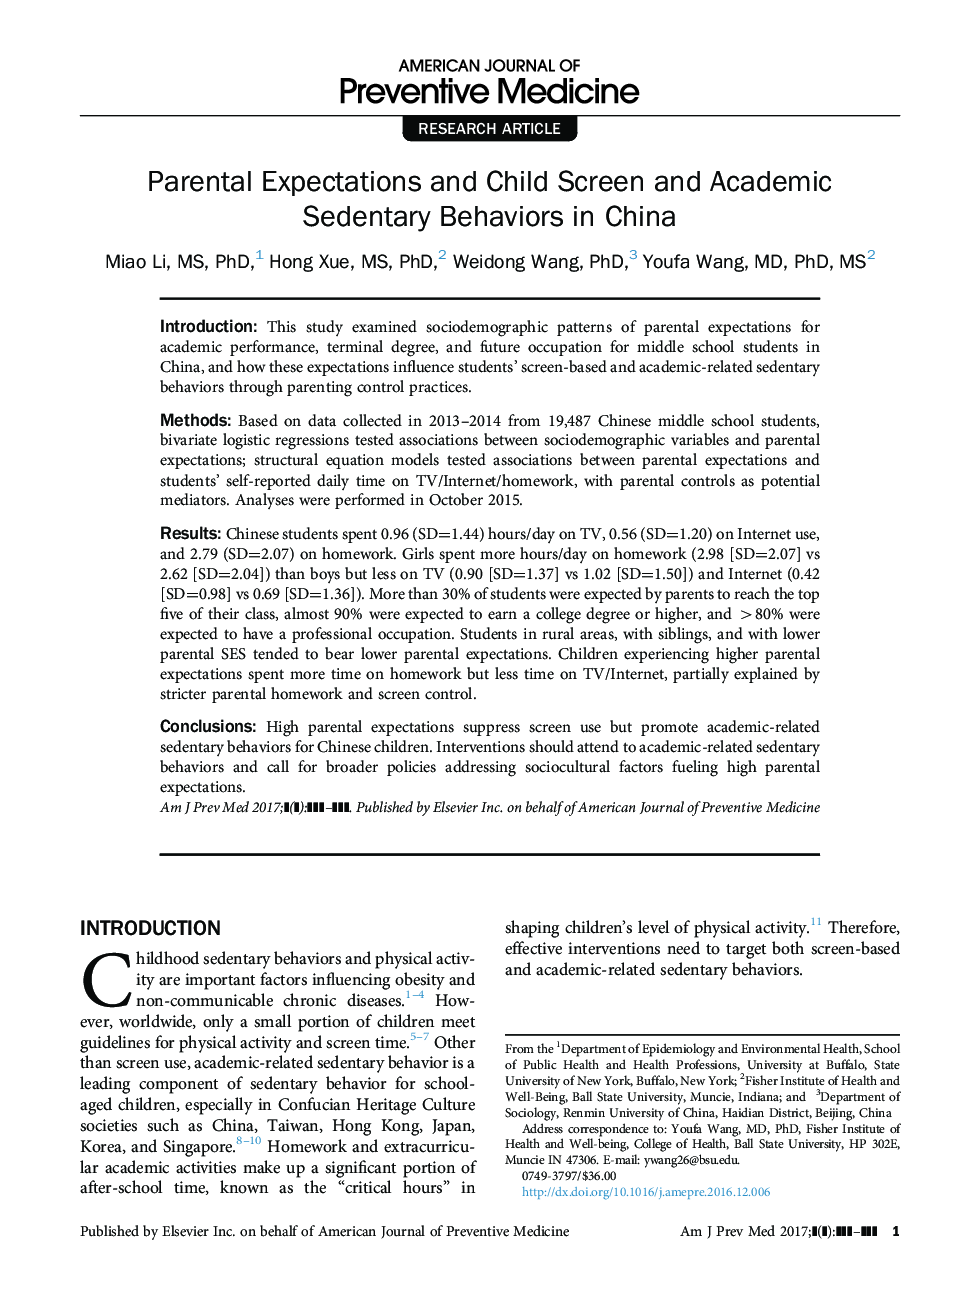 Parental Expectations and Child Screen and Academic Sedentary Behaviors in China